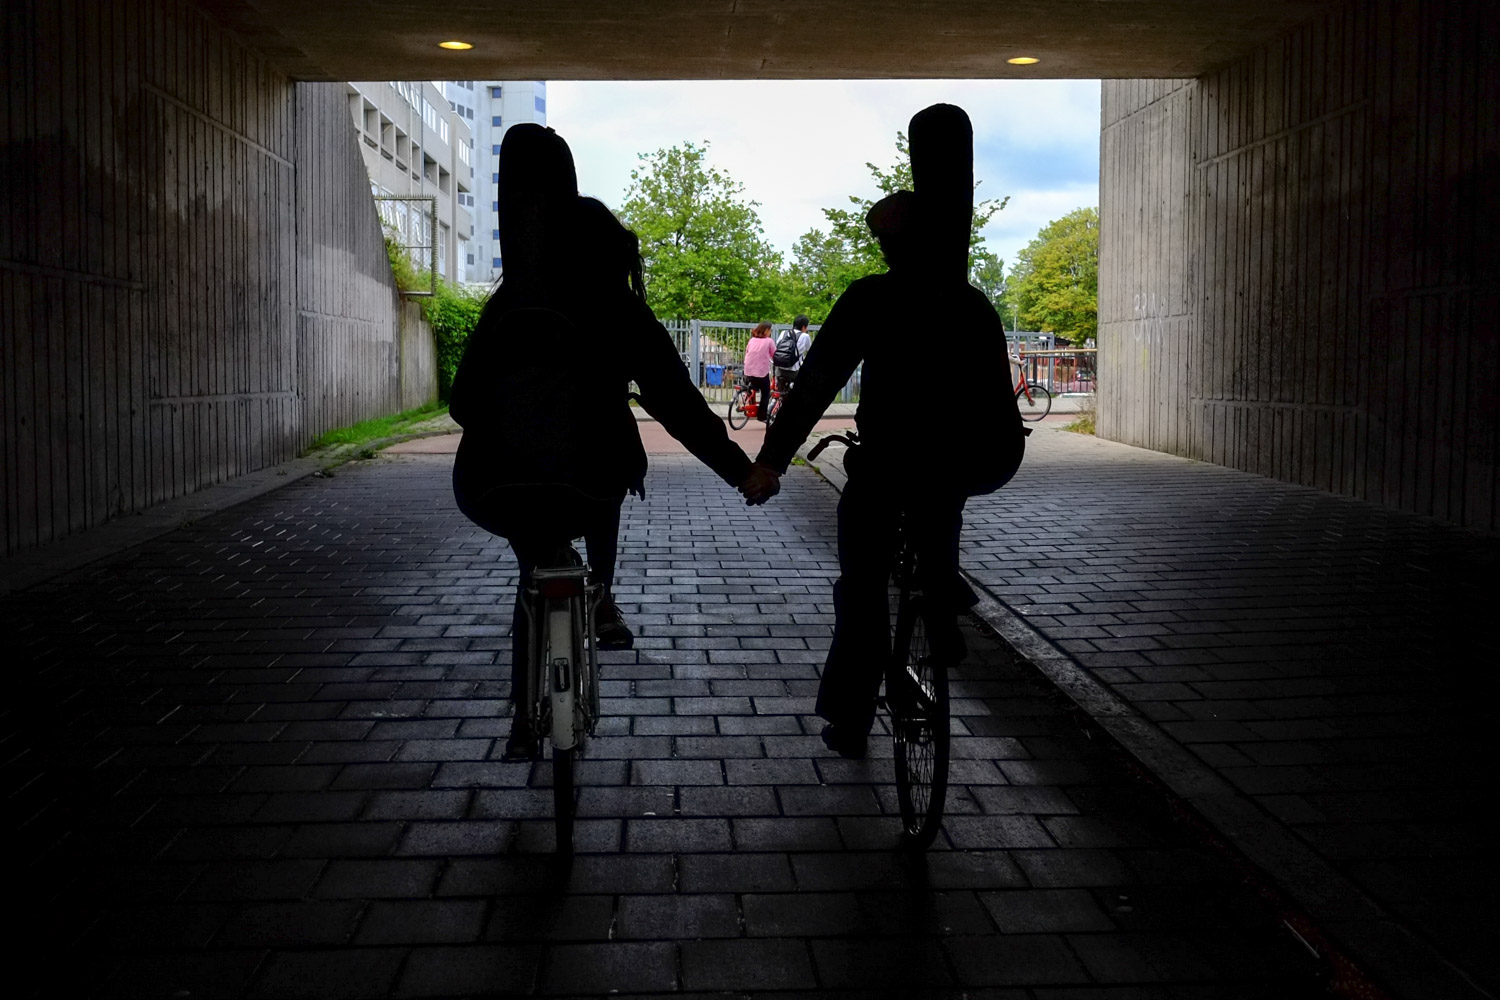 A musical couple rides hand in hand in Amsterdam. Photo by David Niddrie